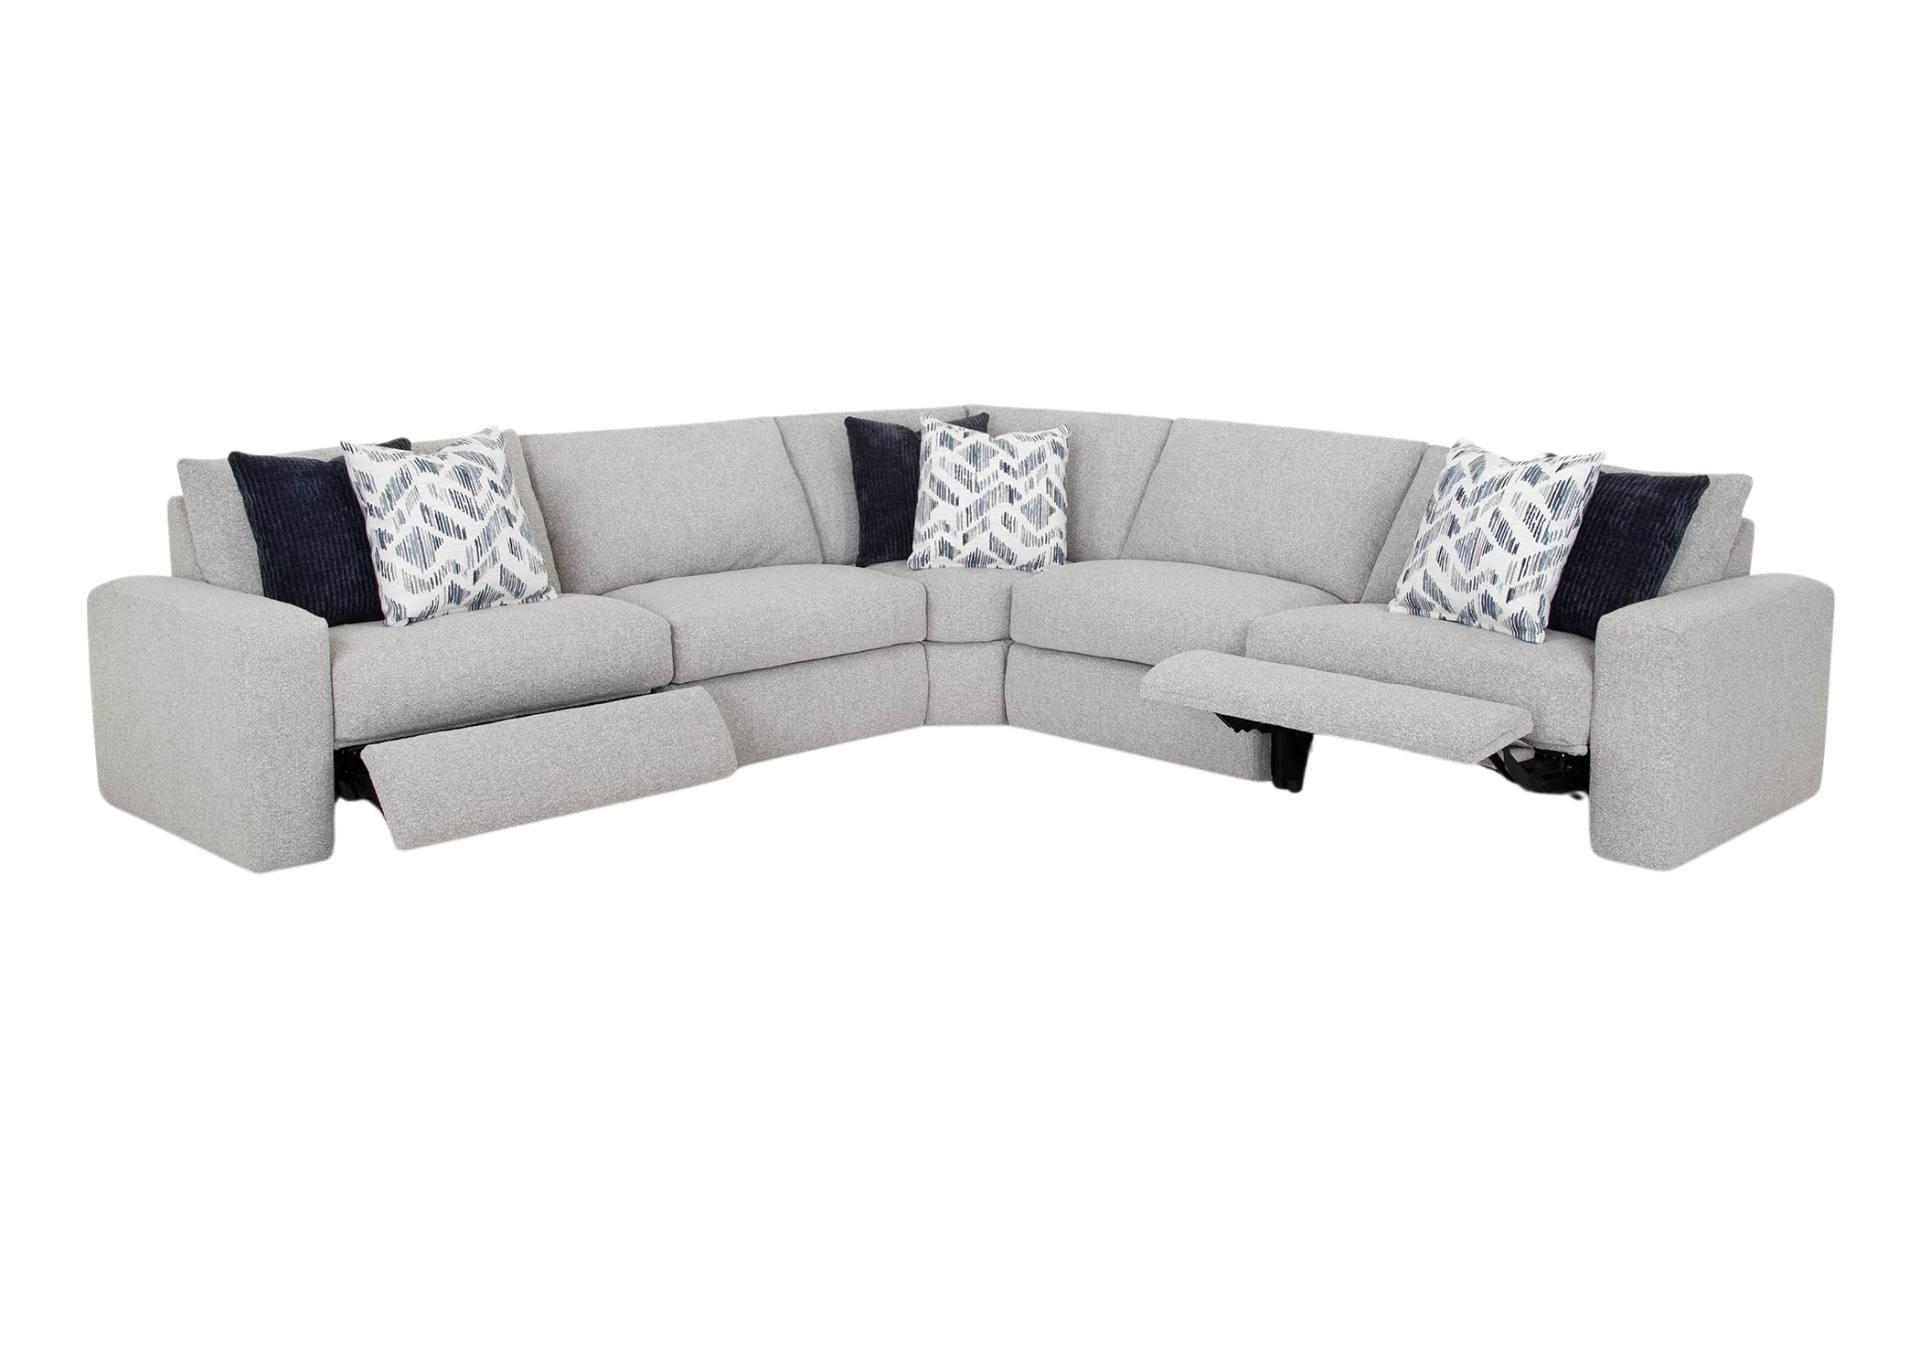 TORONTO 5PC. PWR SECTIONAL,FRANKLIN